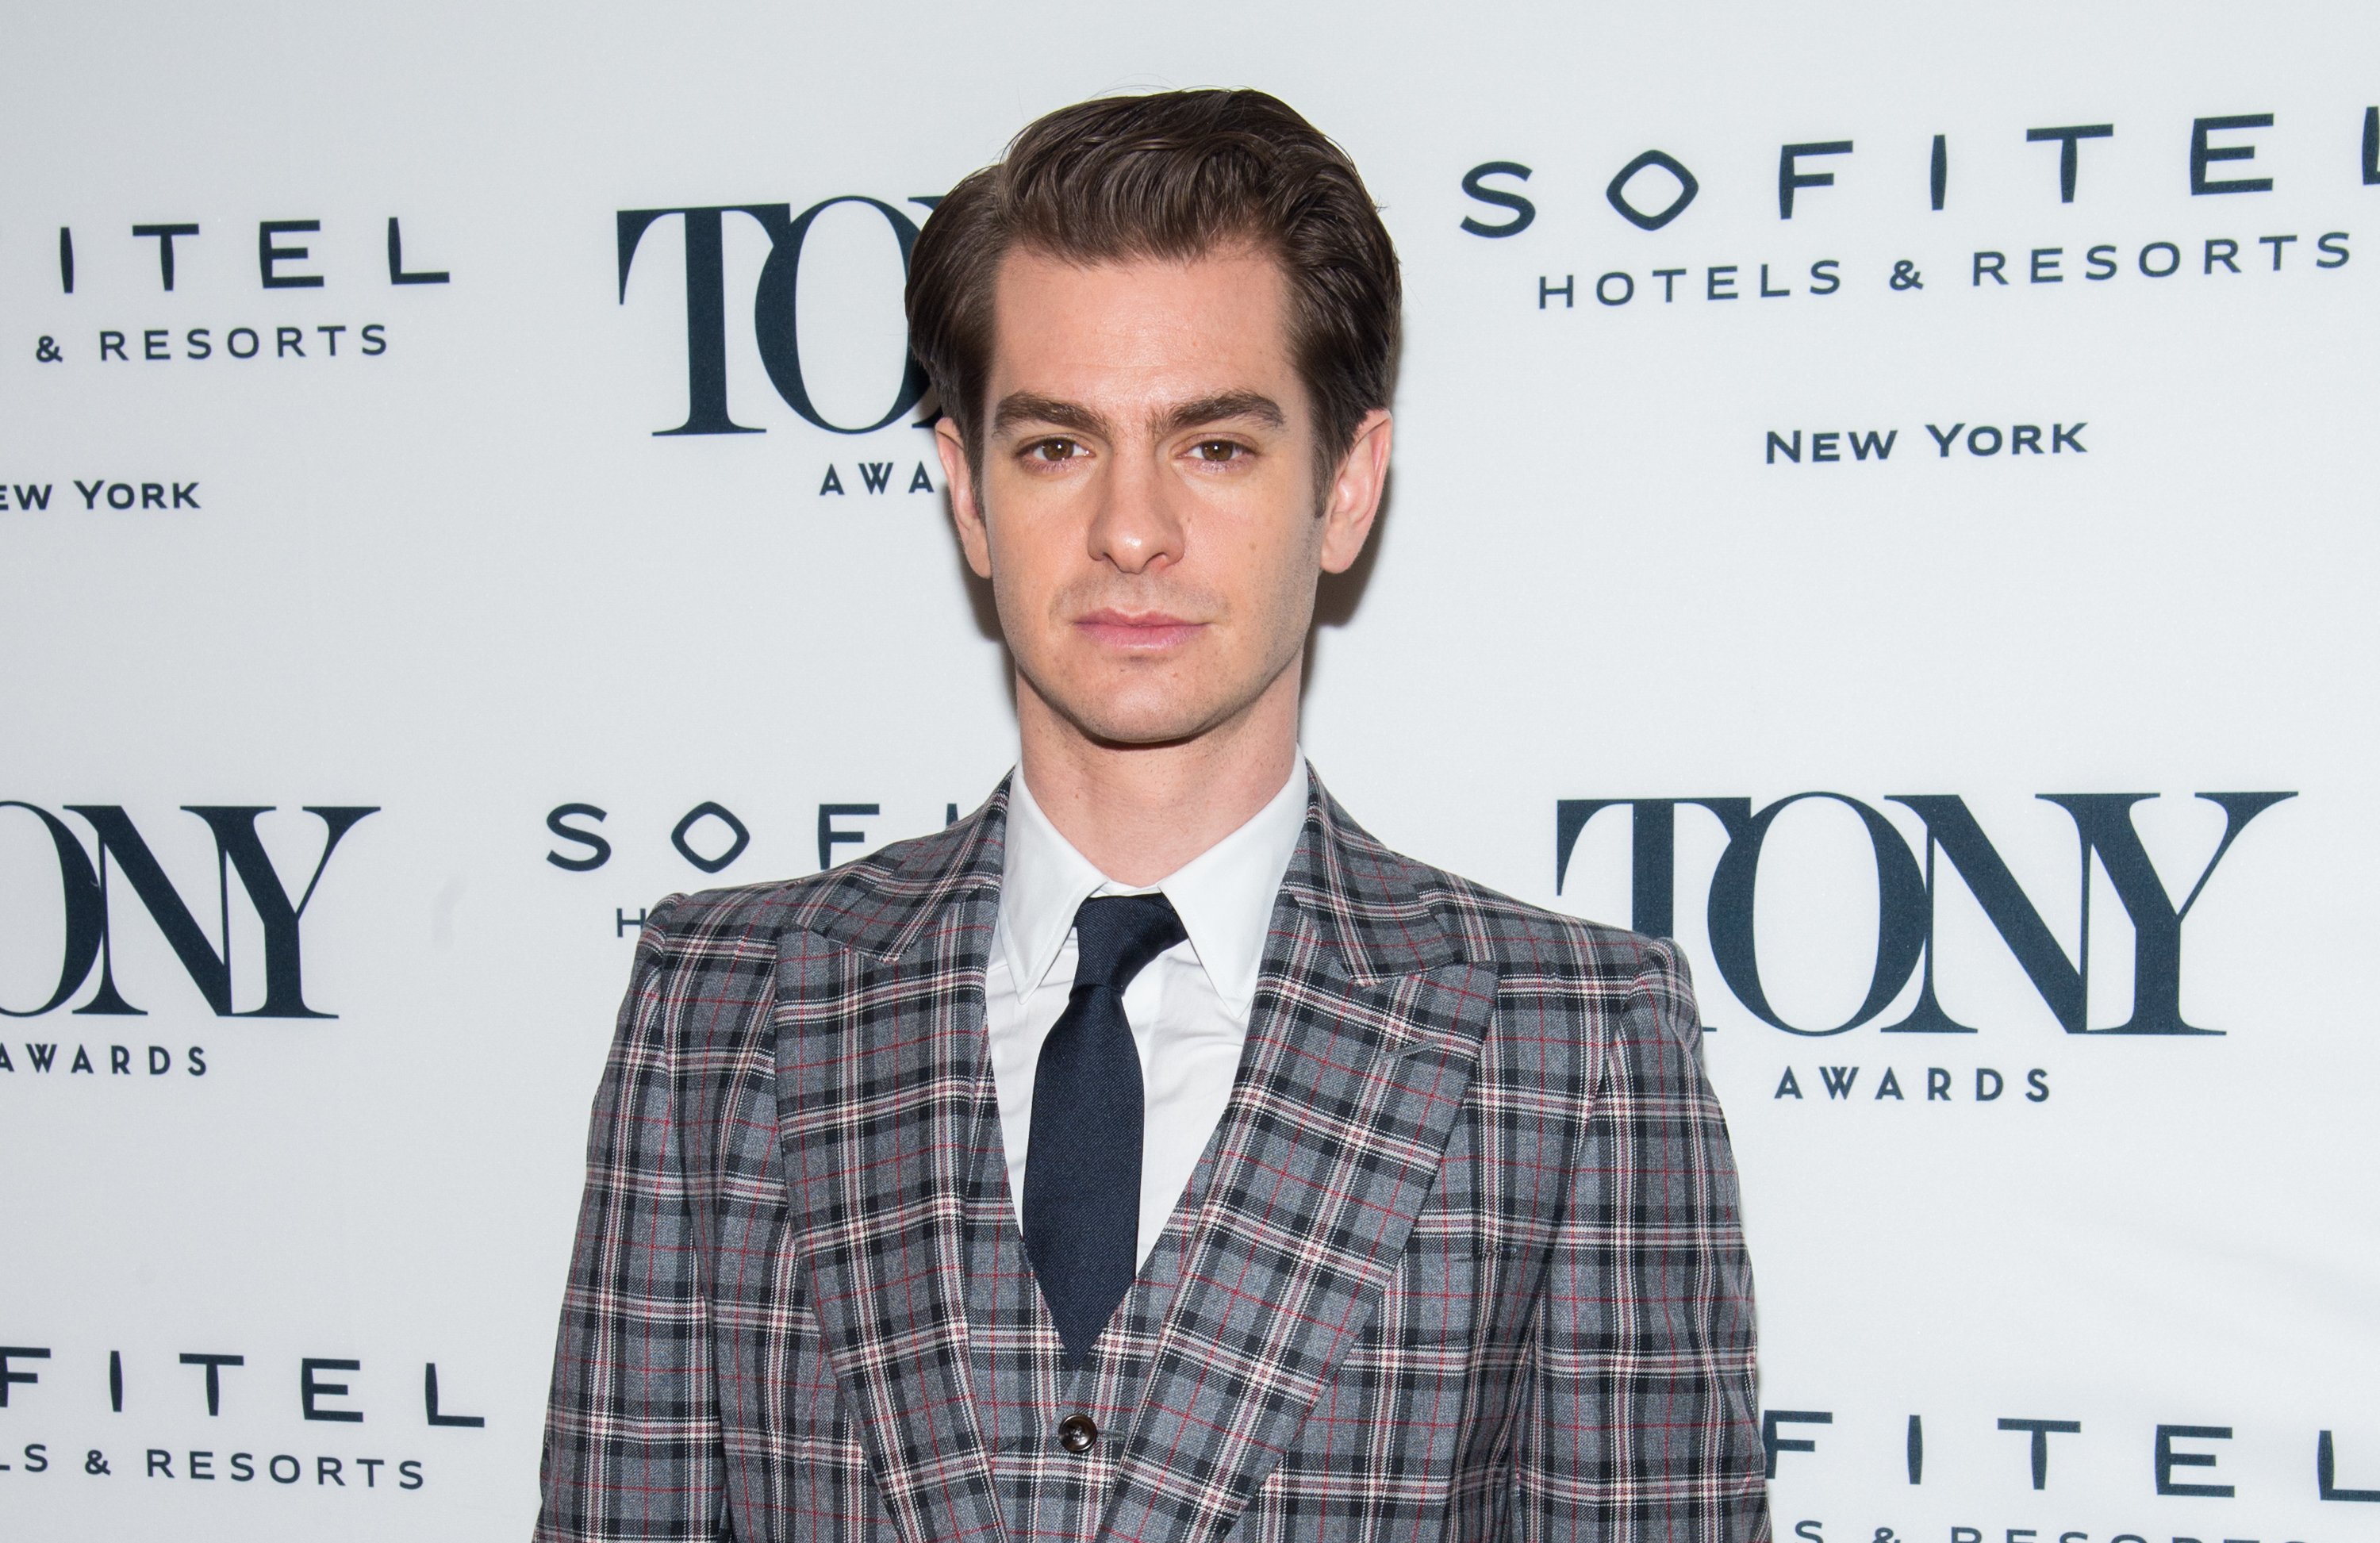 Andrew Garfield at the 2018 Tony Honors For Excellence In The Theatre and 2018 Special Award Recipients Cocktail Party at the Sofitel Hotel in New York City | Photo: Mark Sagliocco/WireImage via Getty Images